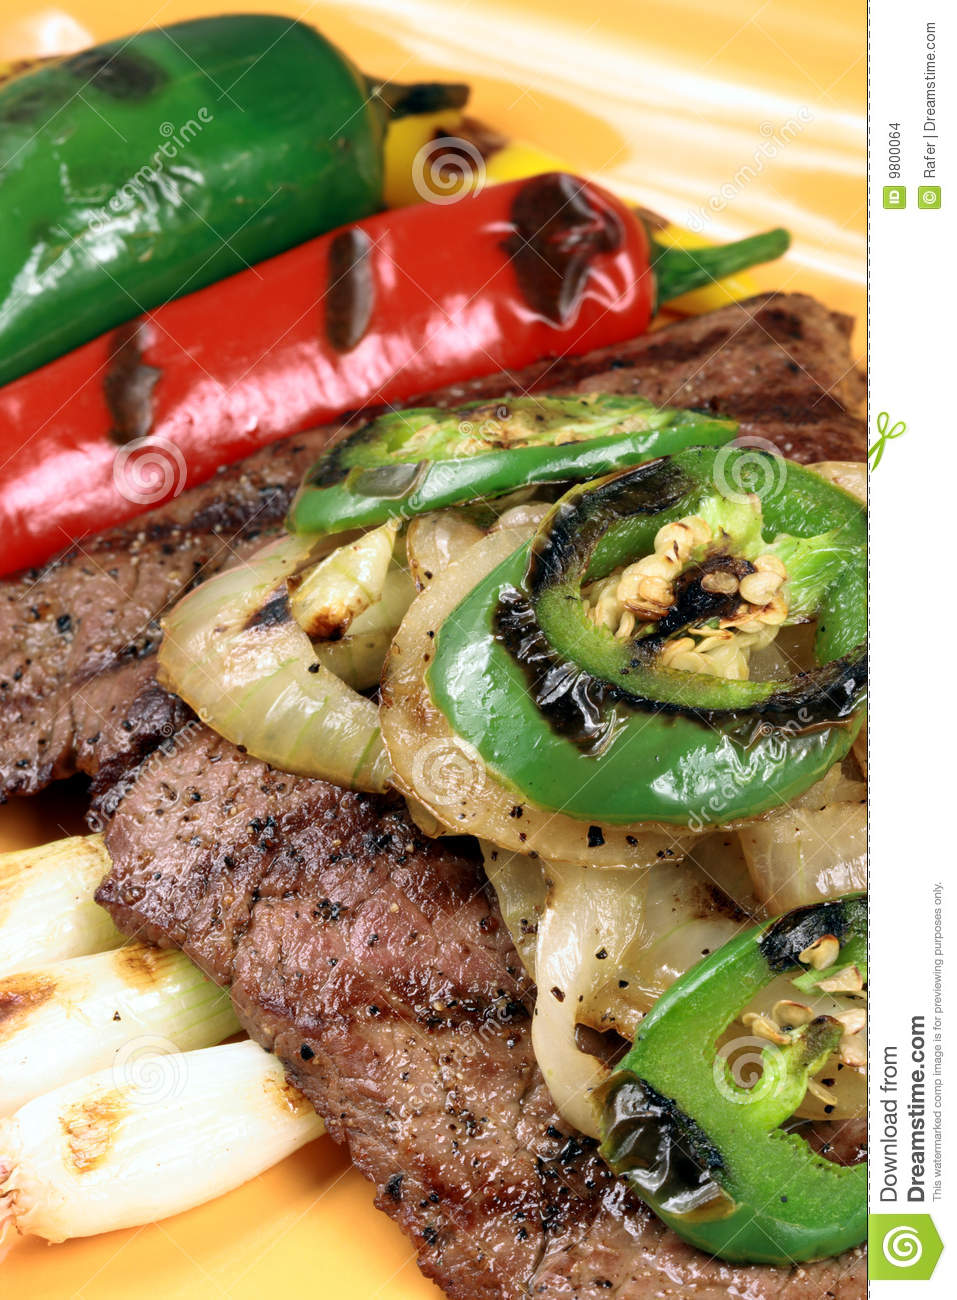 Mexican Juicy Beef Grilled To Perfection Thick And Flavorful Cut With